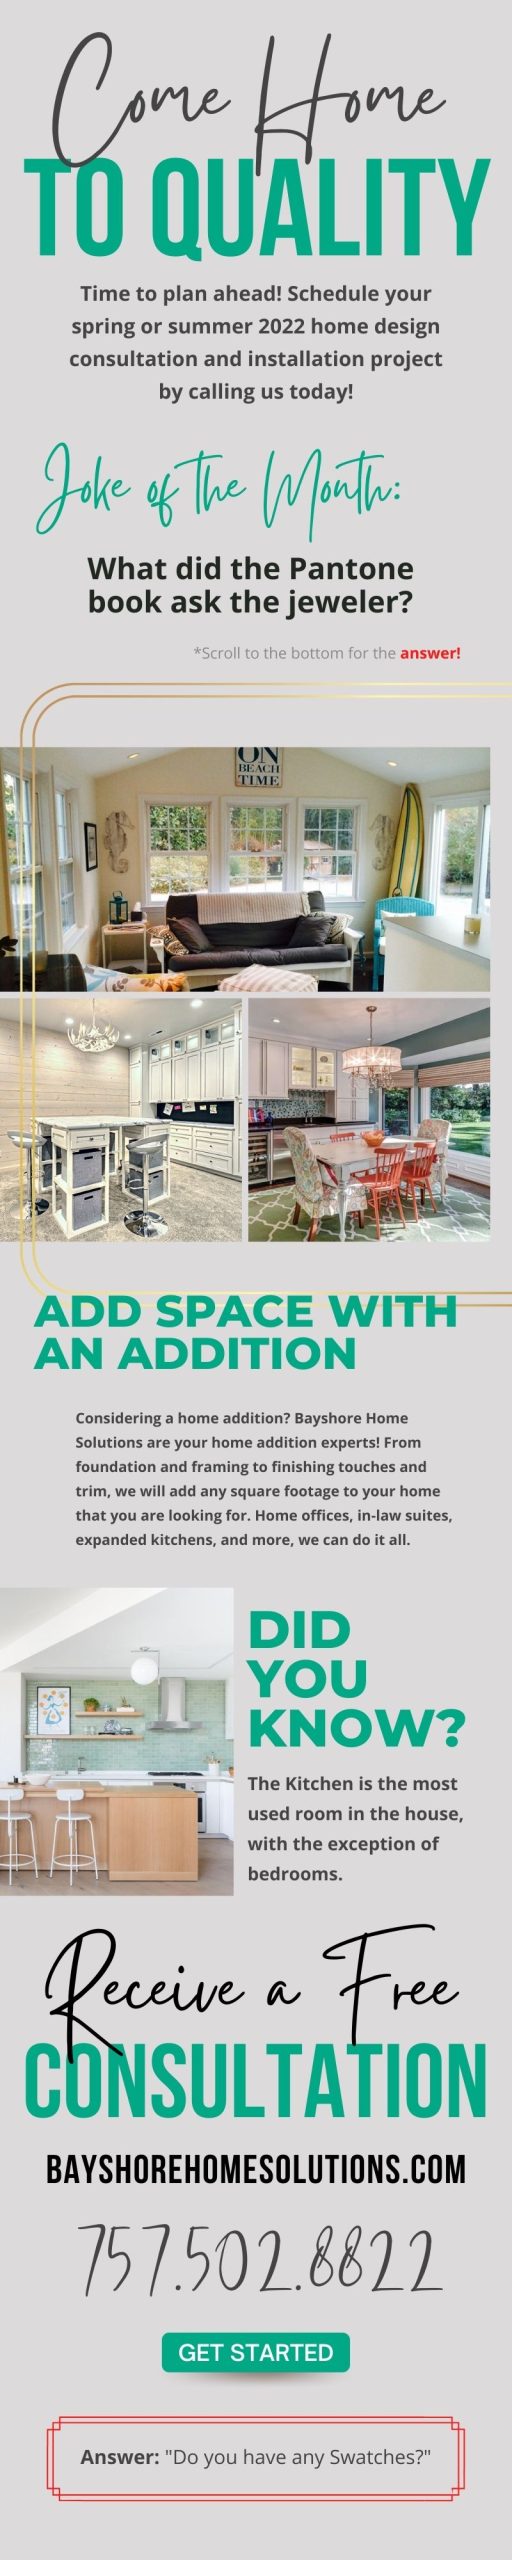 Bayshore Home Solutions Email Blast February 2022 scaled